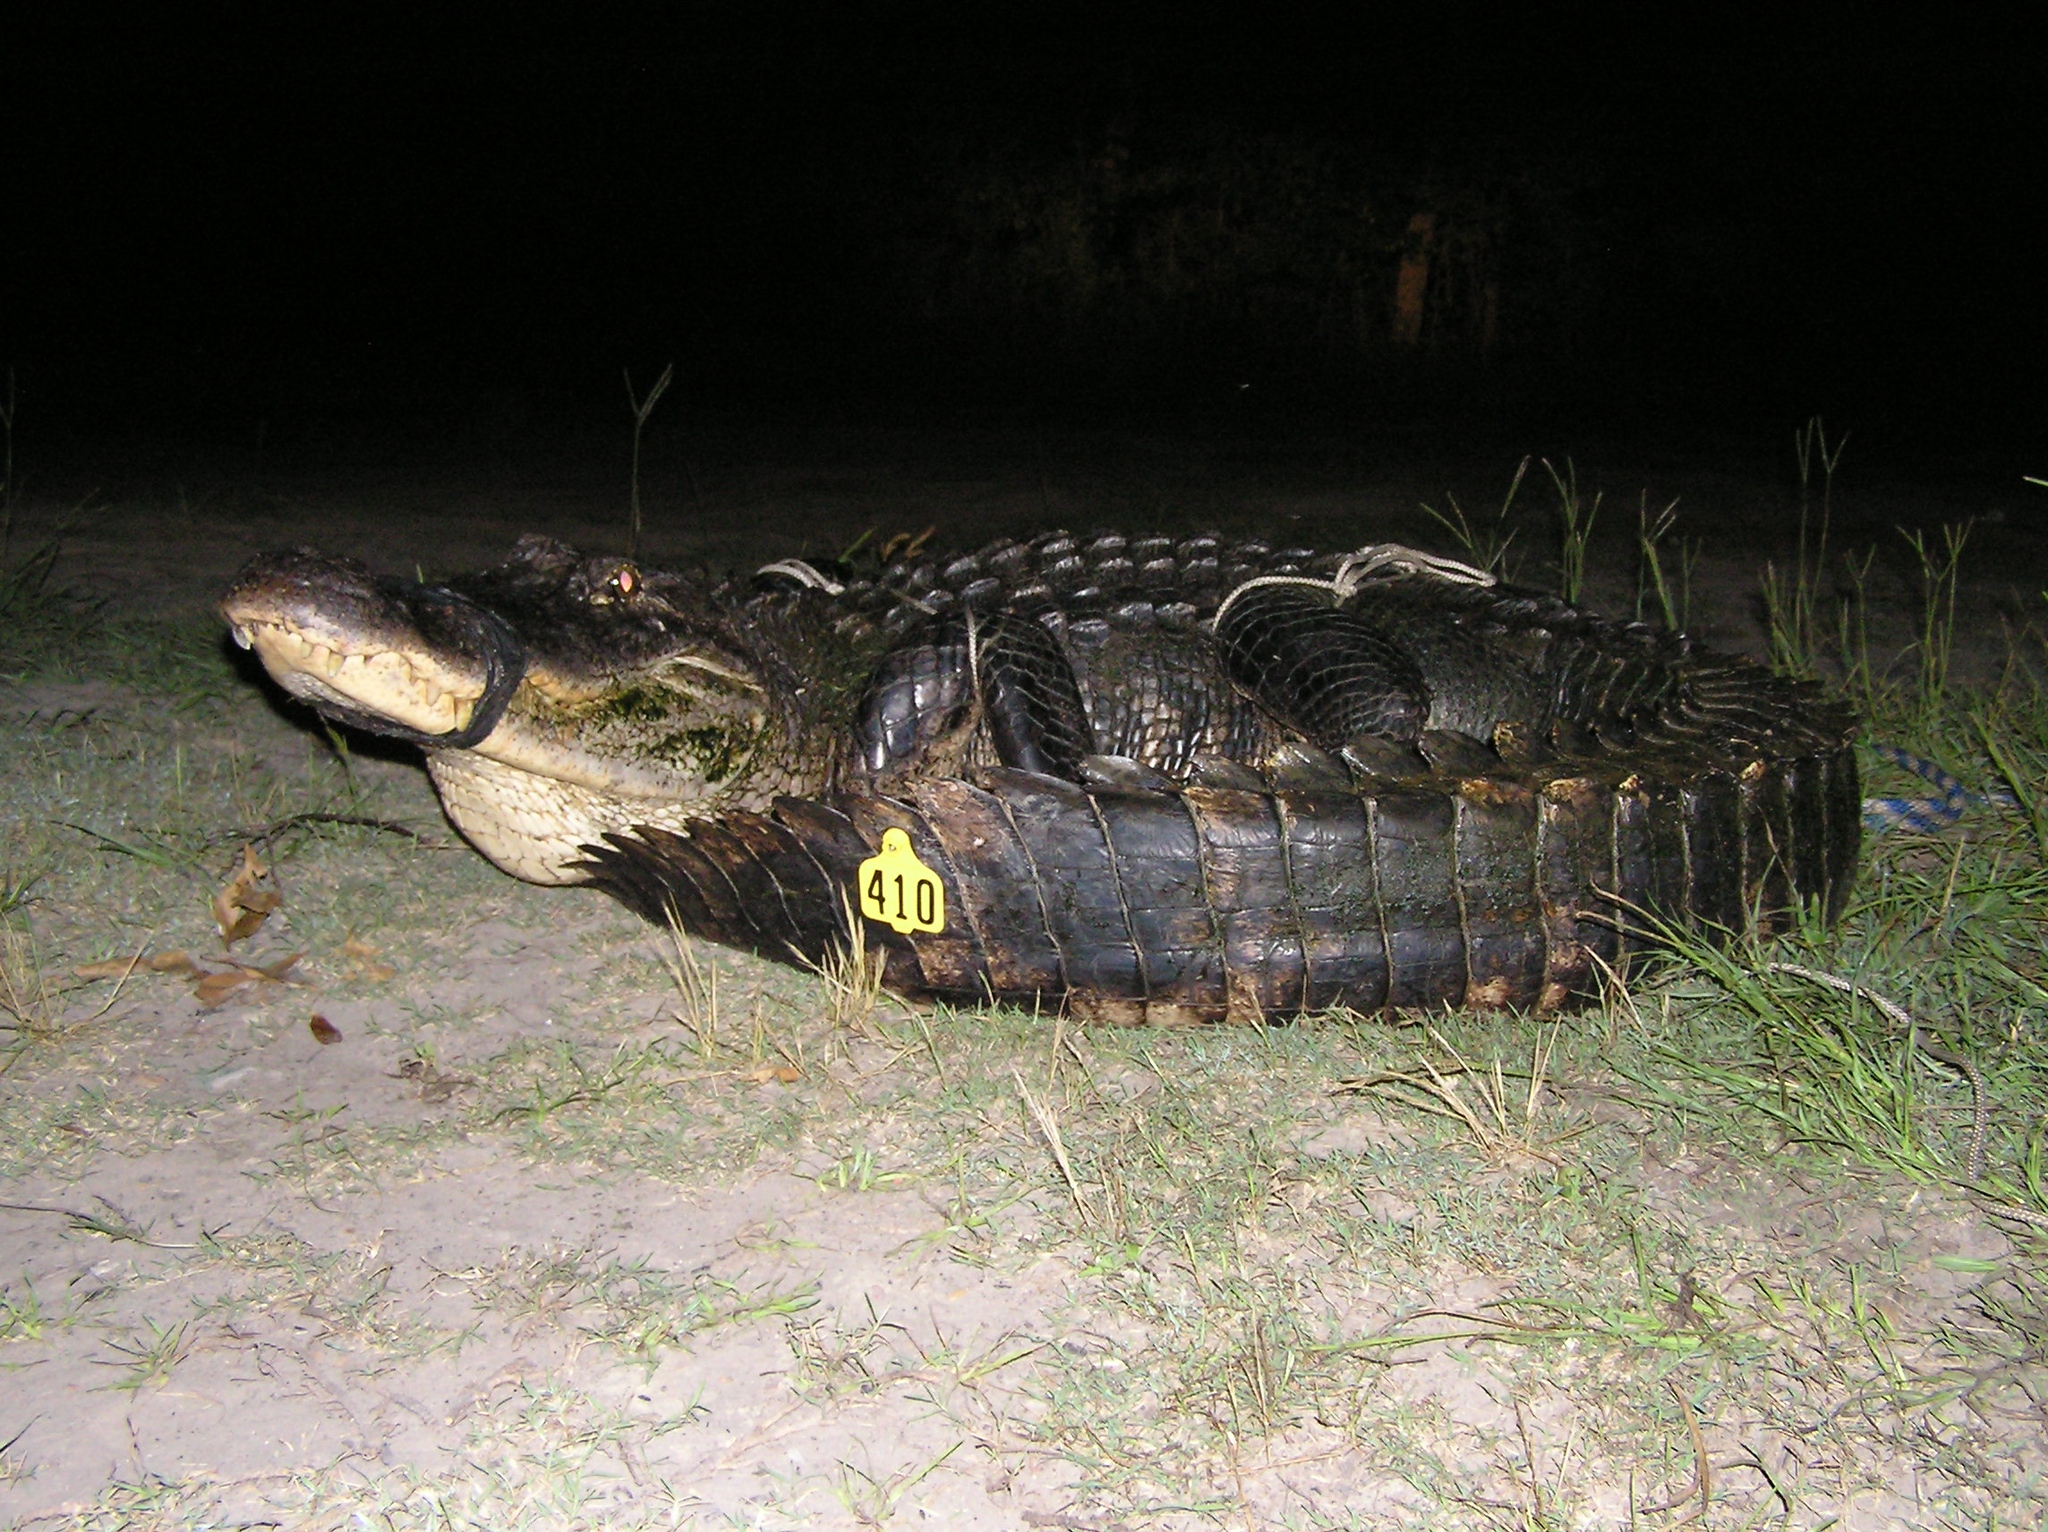 The alligator was captured and tagged in 2009 by the Mississippi Department of Wildlife, Fisheries, and Parks.